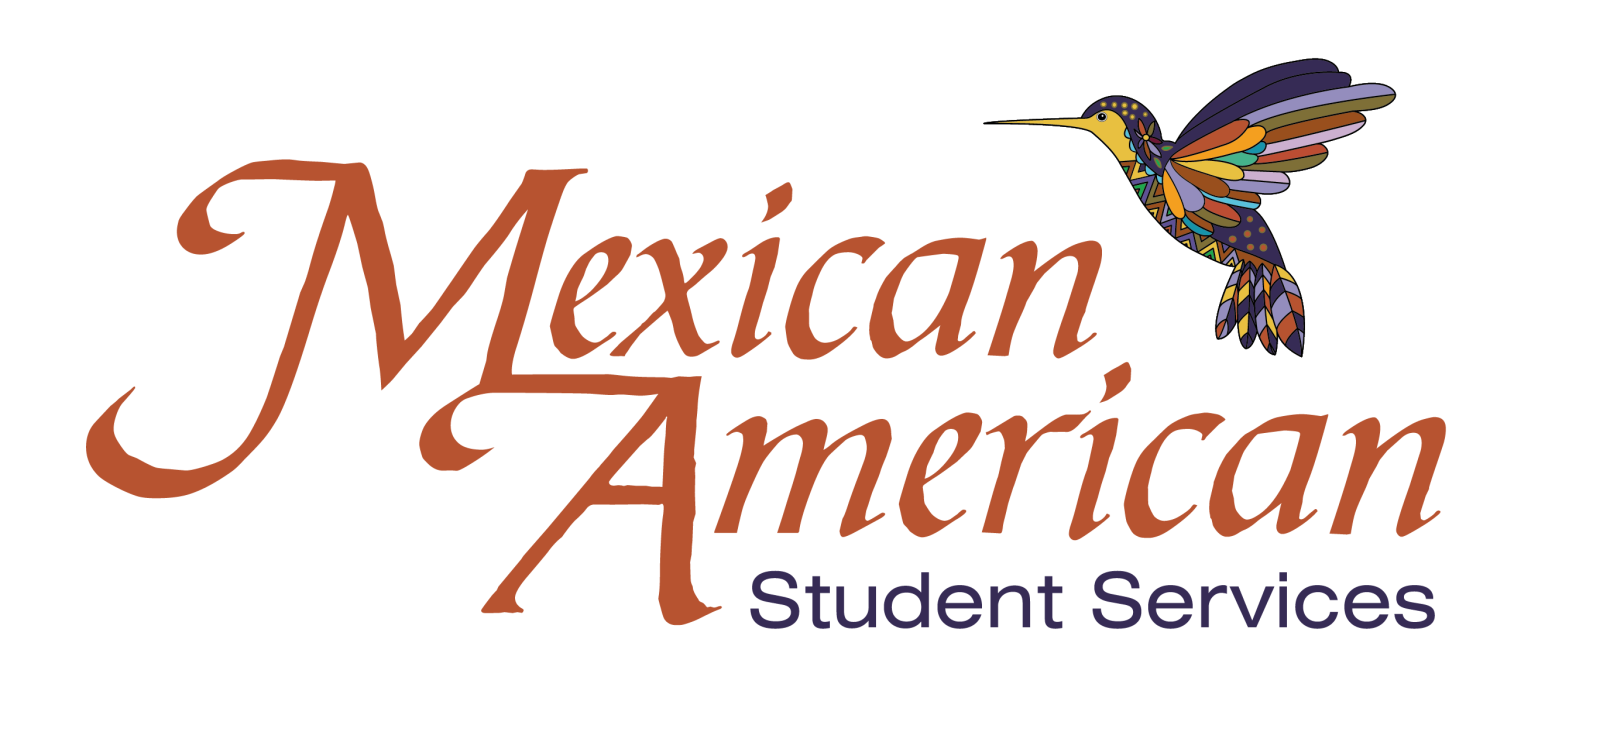 Mexican American Student Services logo